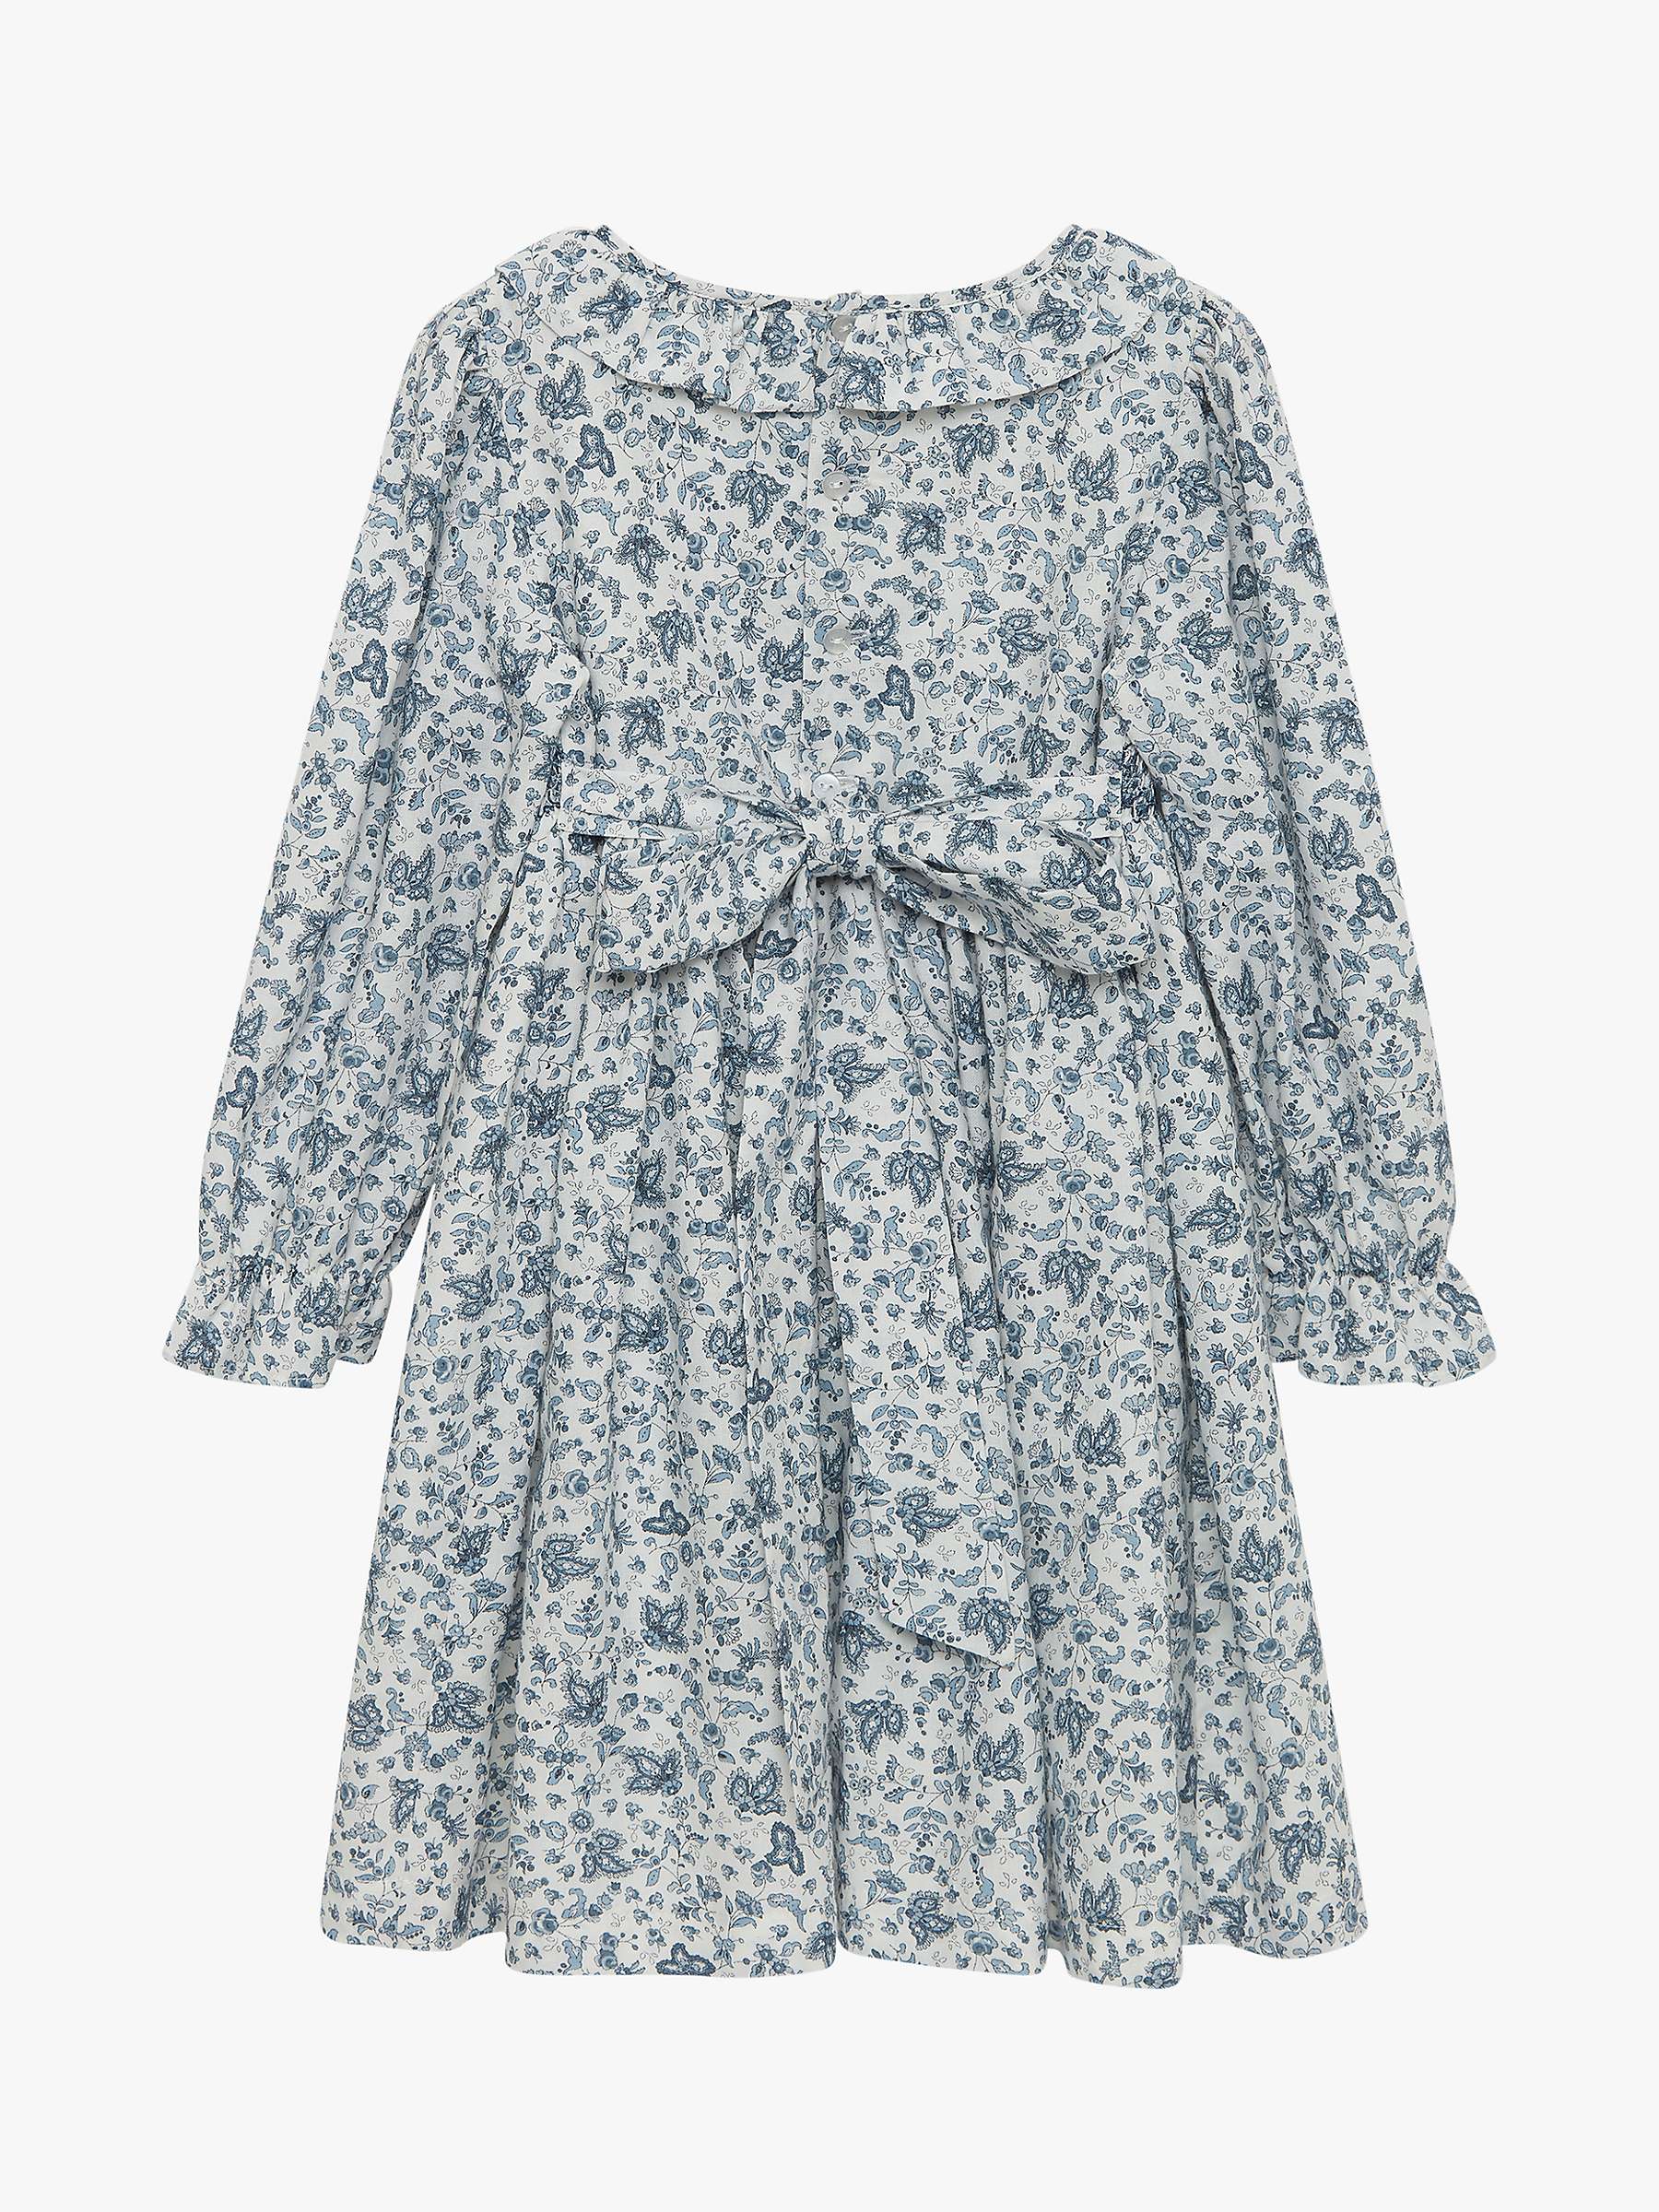 Buy Trotters Confiture Kids' Penny Paisley Smocked Dress, Off White/Blue Online at johnlewis.com